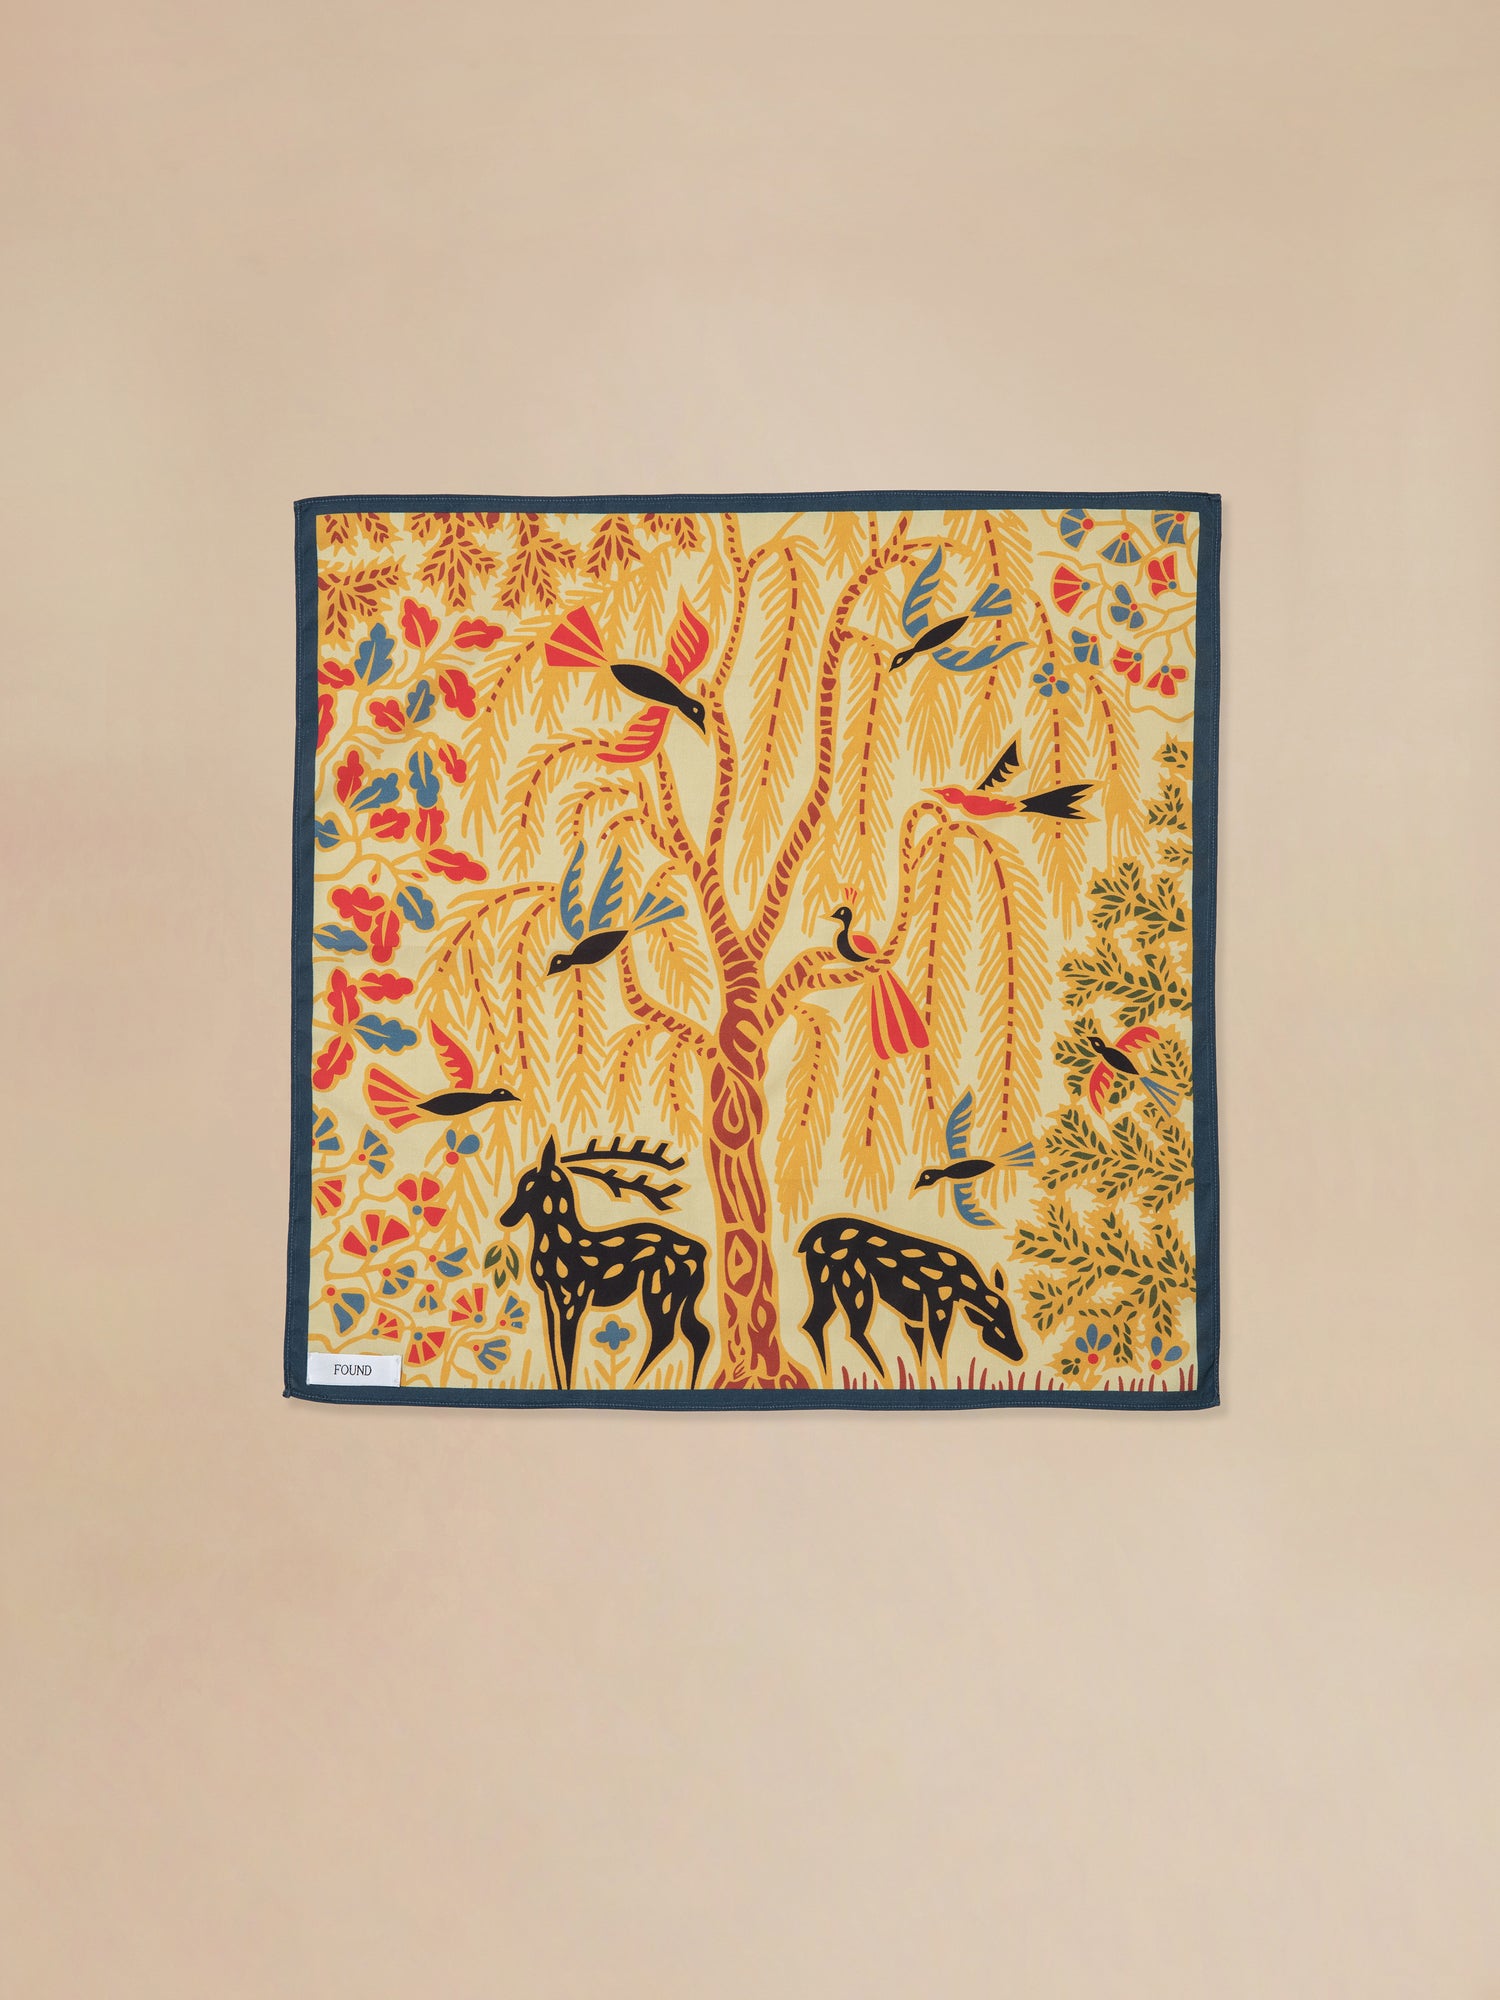 A Coming Soon | Rainforest Bandana with a painting of a deer and a tree by Found.